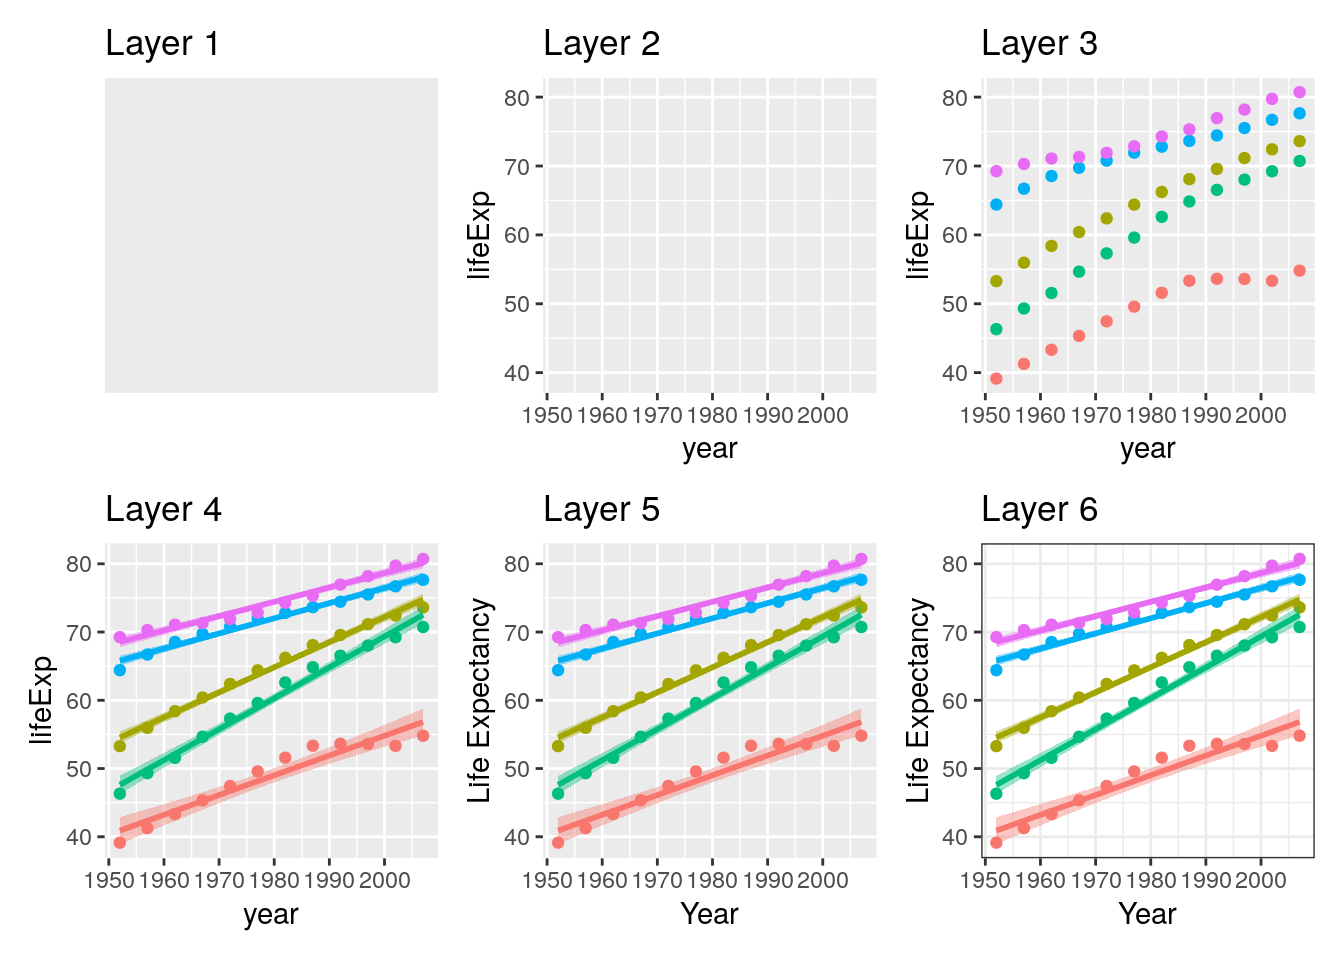 Peeling back the layers of a ggplot